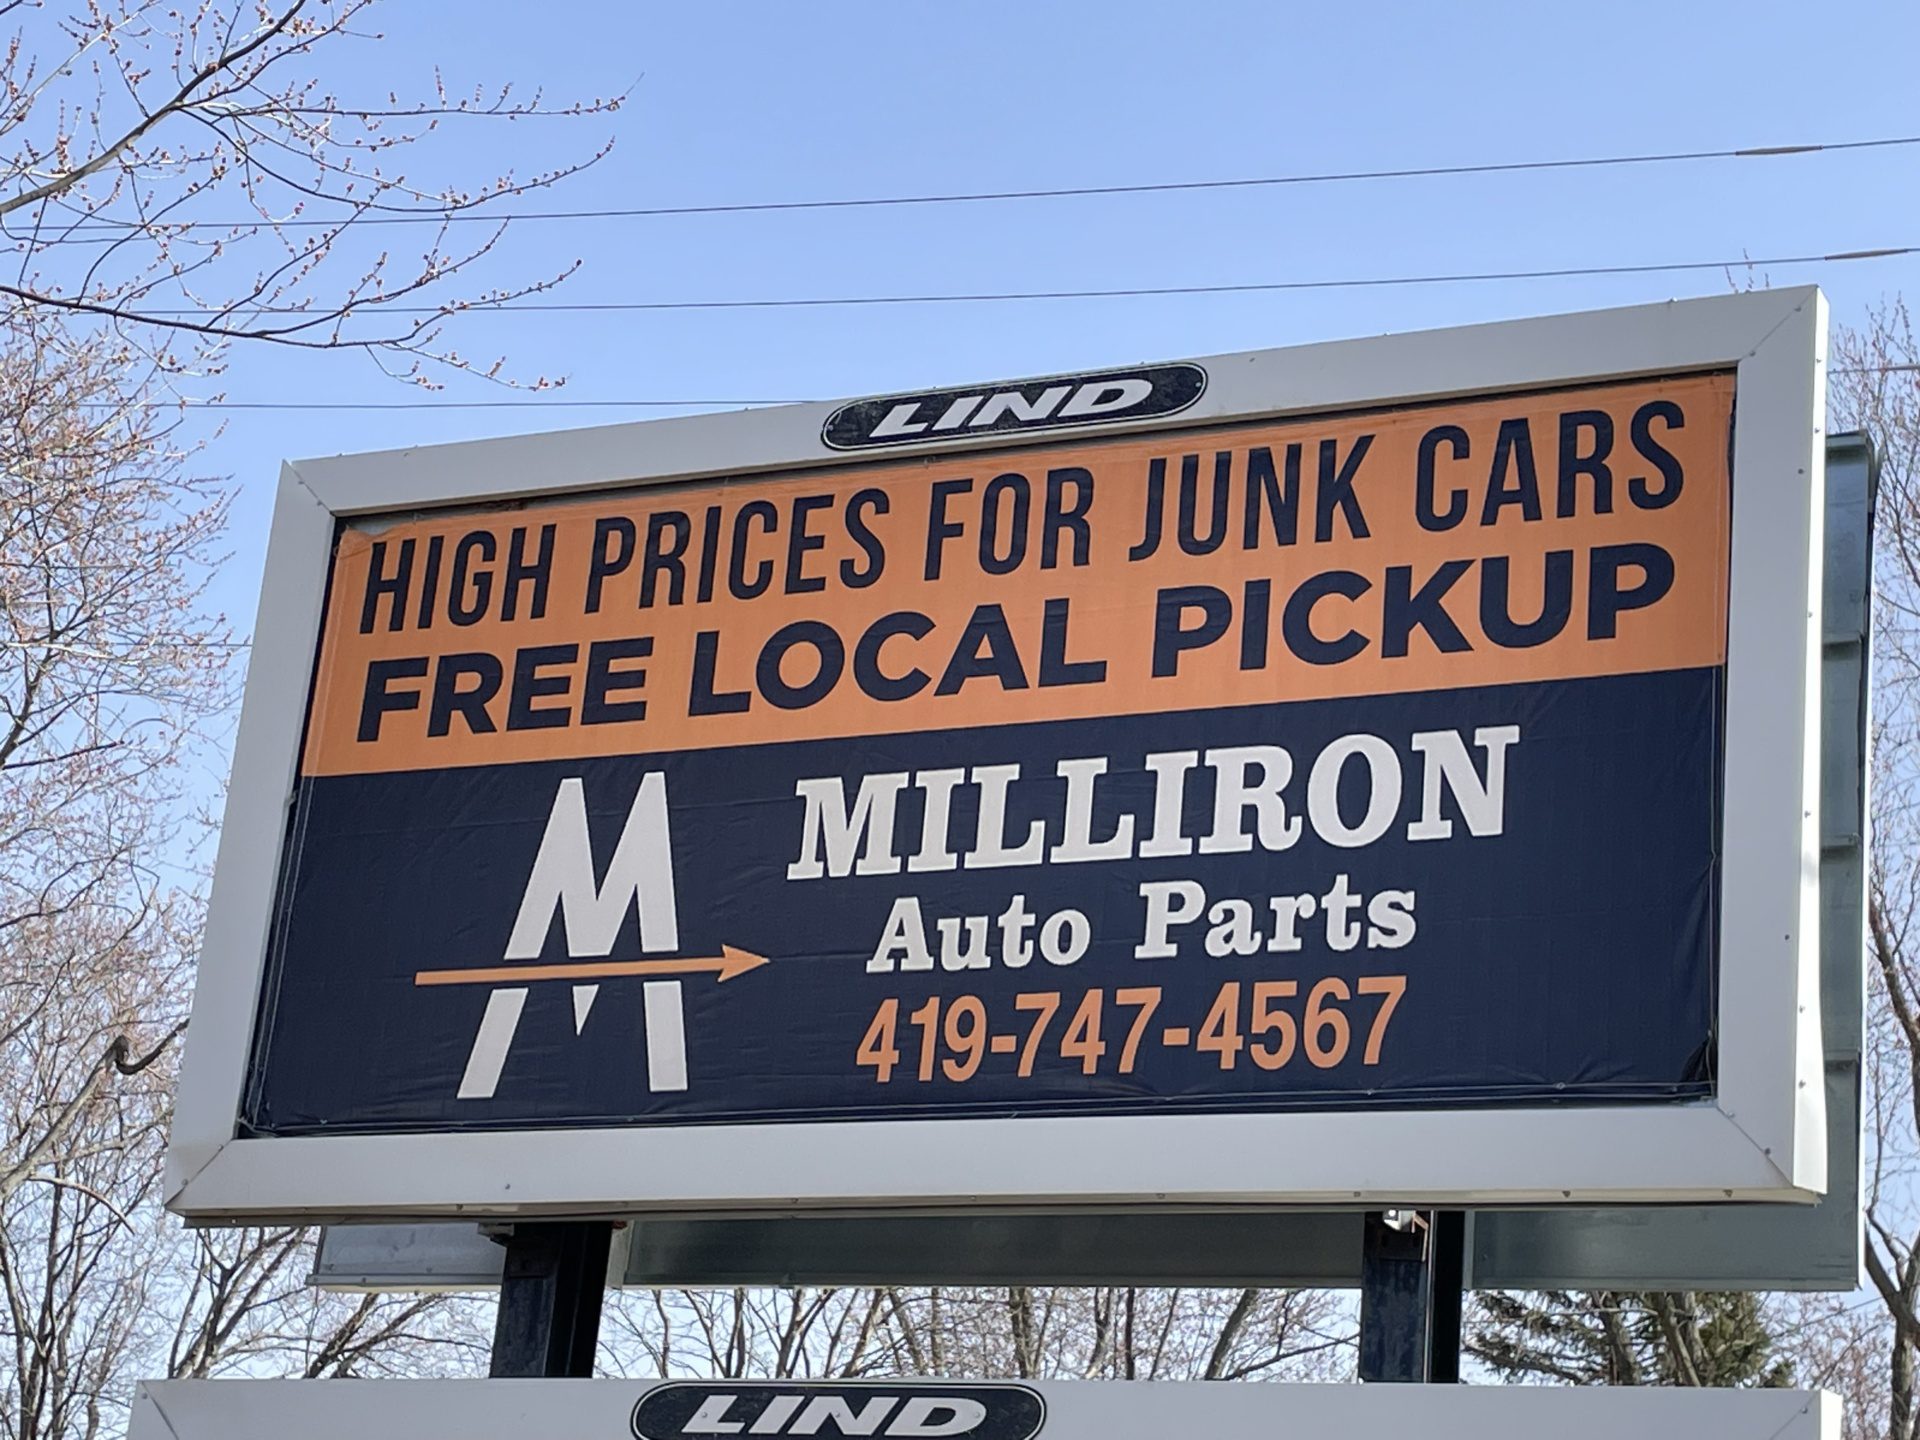 Milliron, auto parts, recycle, junk cars, free local pickup, pull and save